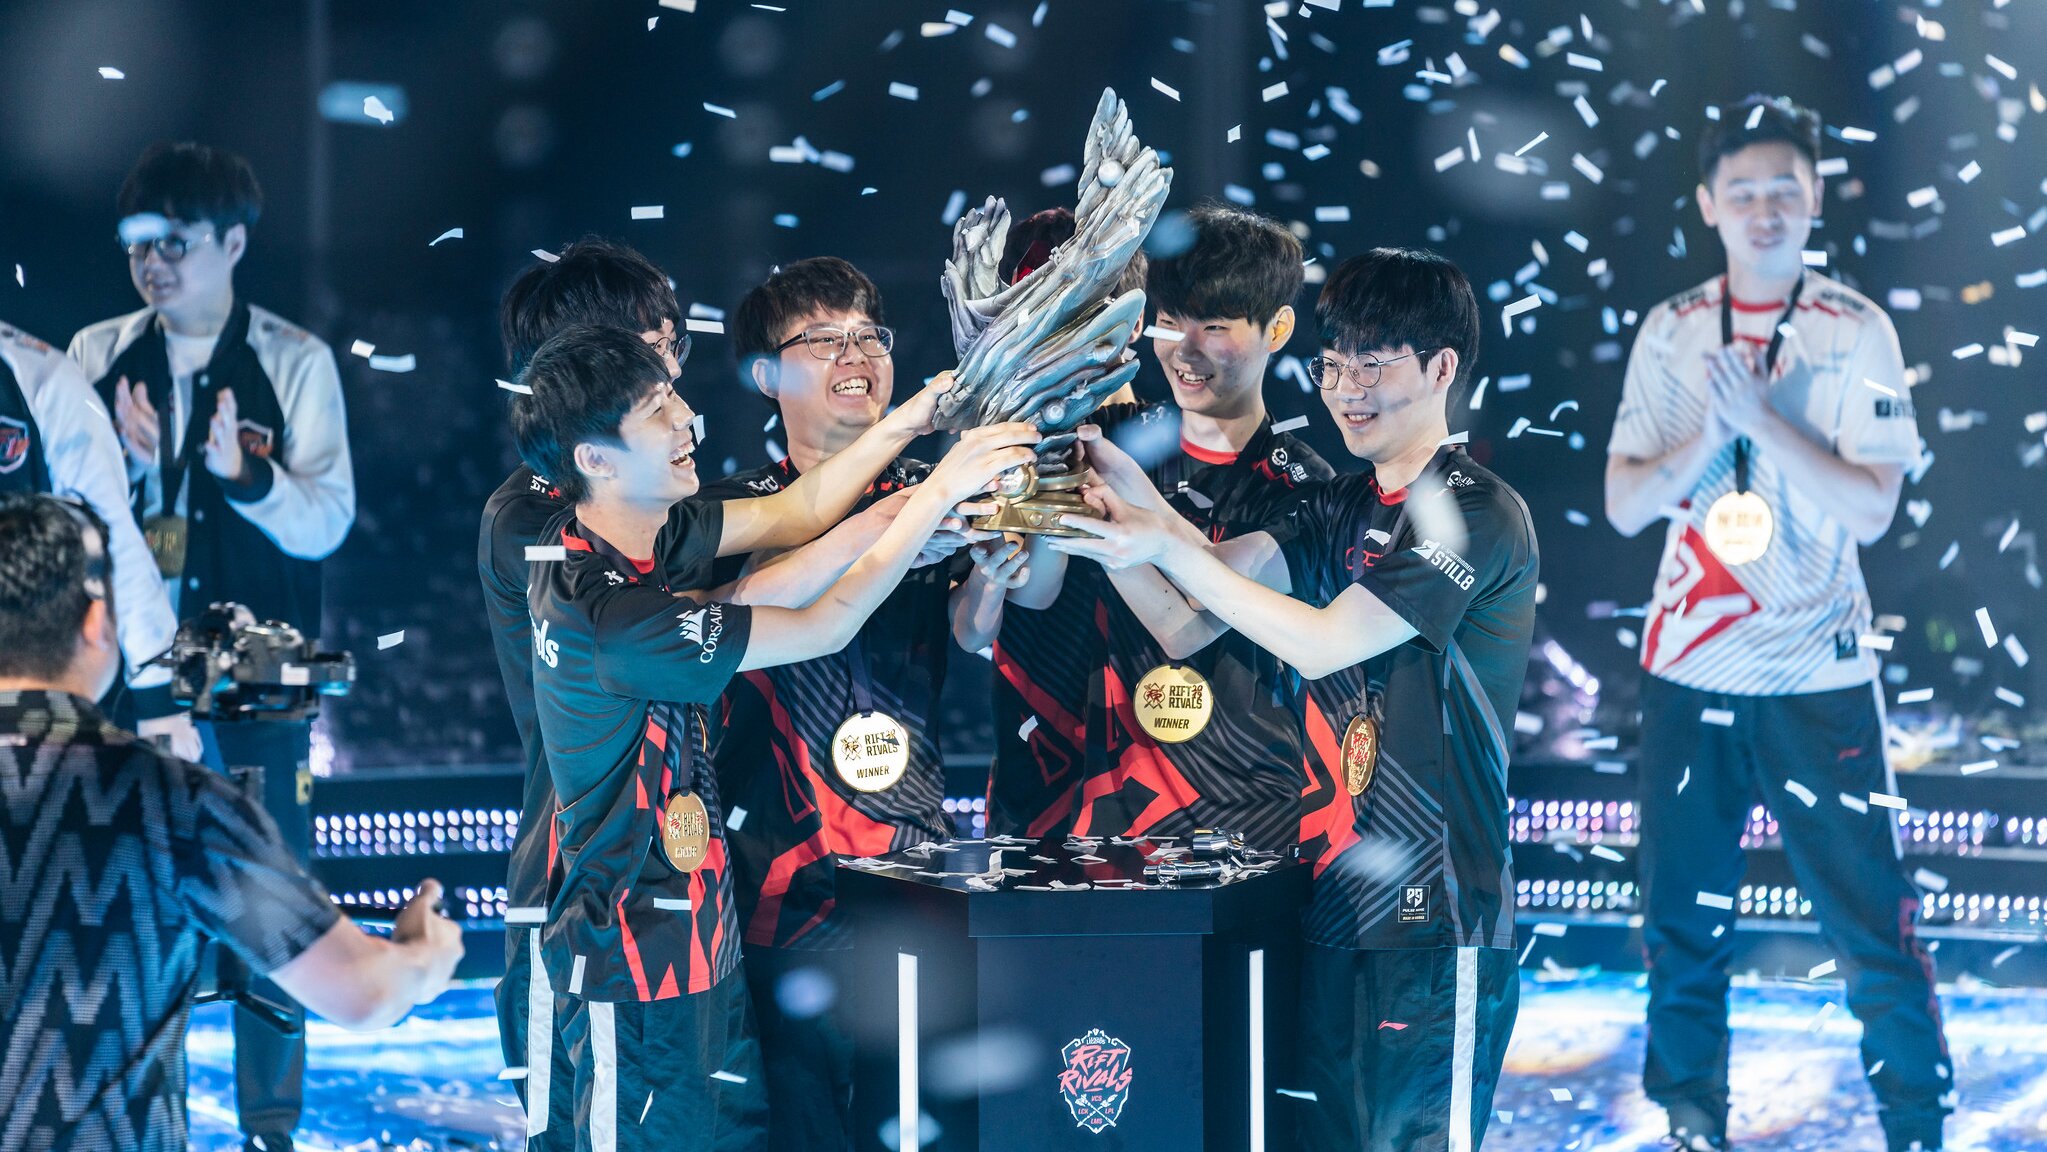 Korea stormed to a 7-1 group stage record en route to a Rift Rivals victory. (Photo courtesy of Riot Games)